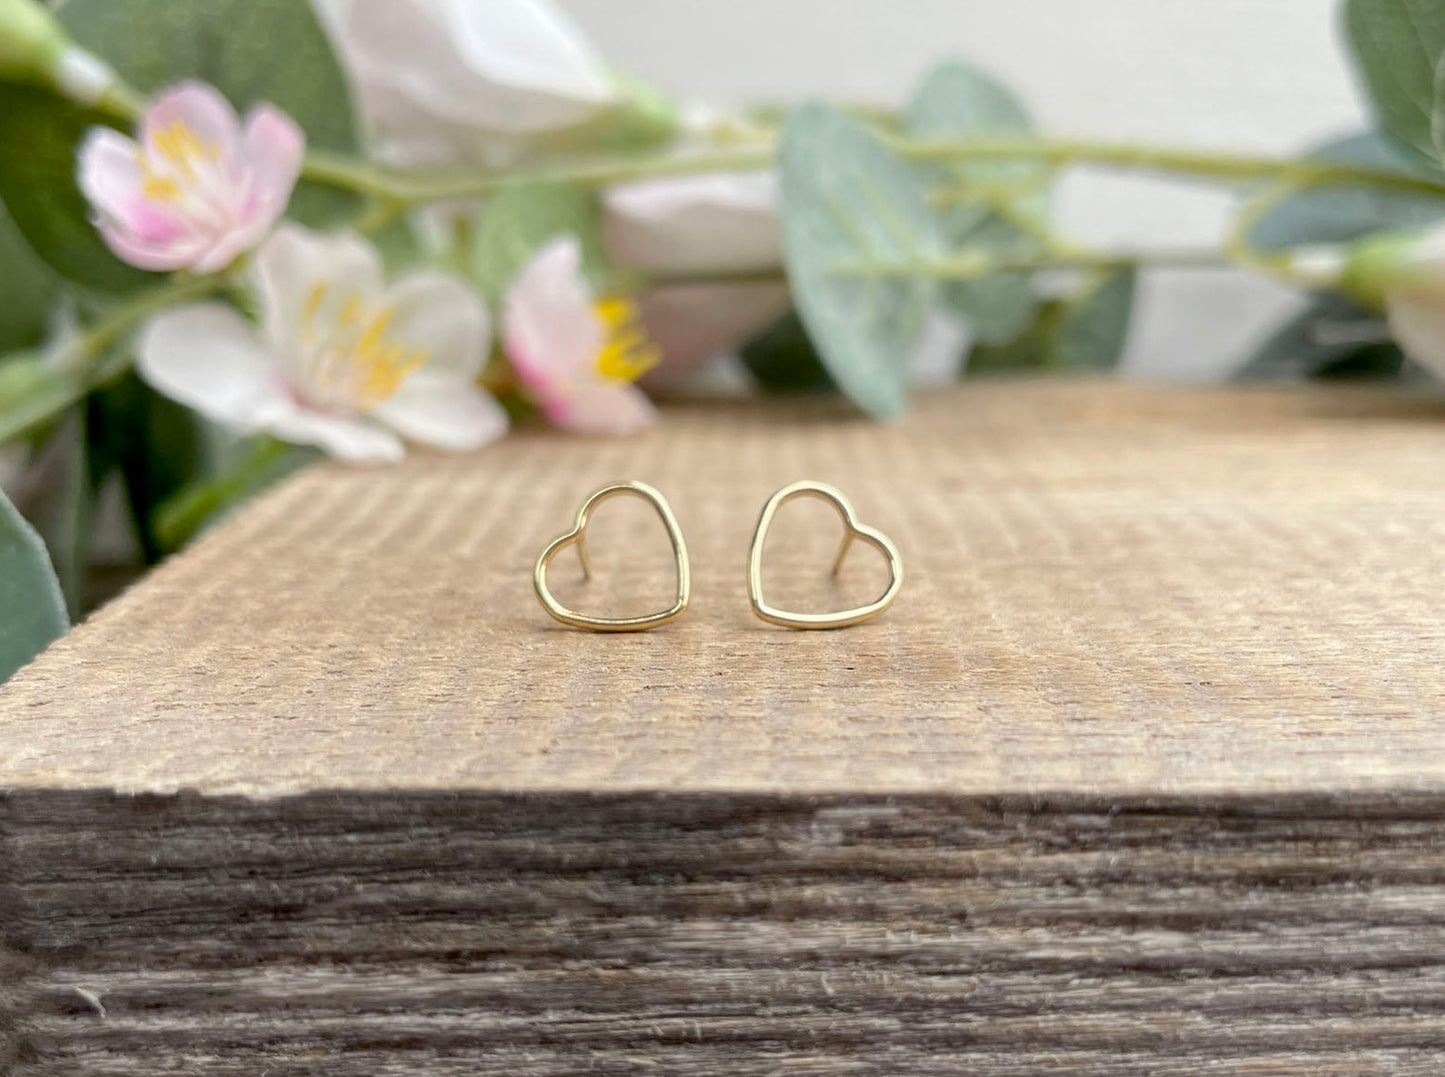 Gold Open Heart Stud Earrings by Curious Magpie Jewellery